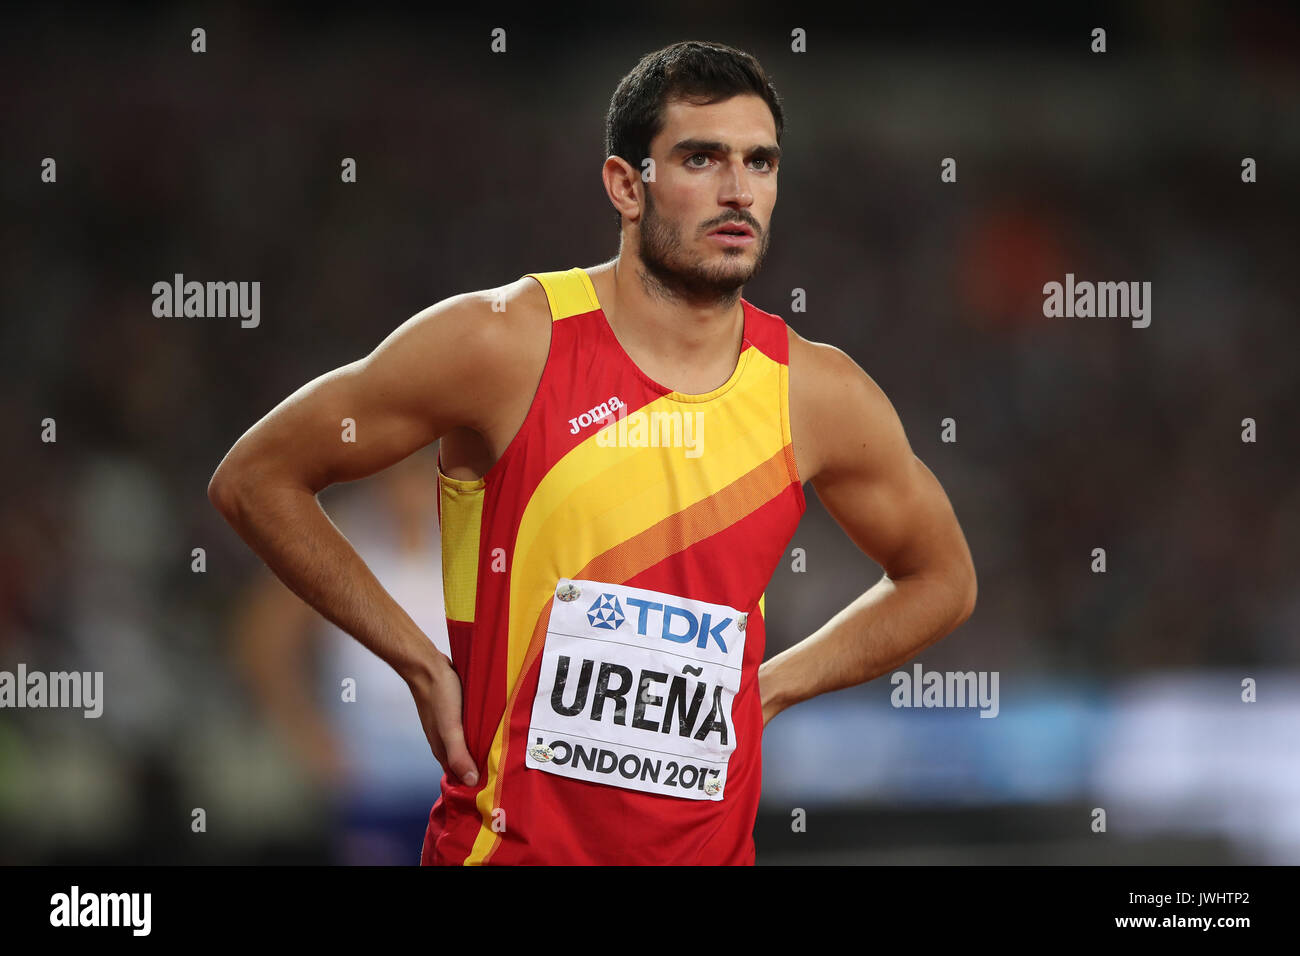 Spain's Jorge Urena before the 400m event of the men's Decathlon during day  eight of the 2017 IAAF World Championships at the London Stadium. PRESS  ASSOCIATION Photo. Picture date: Friday August 11,